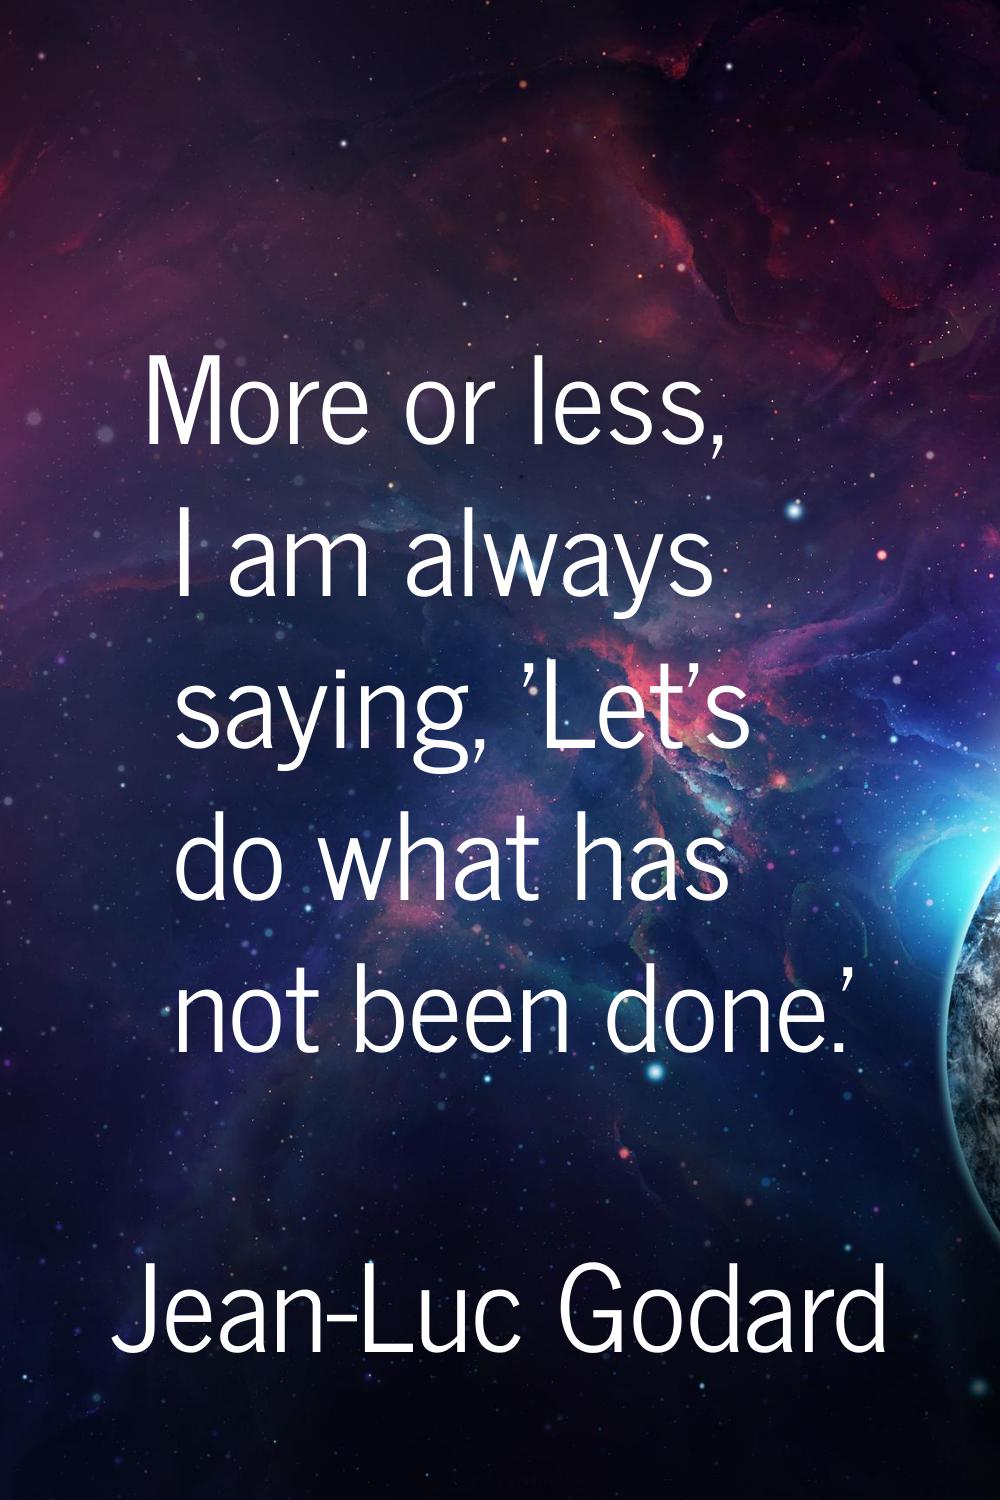 More or less, I am always saying, 'Let's do what has not been done.'